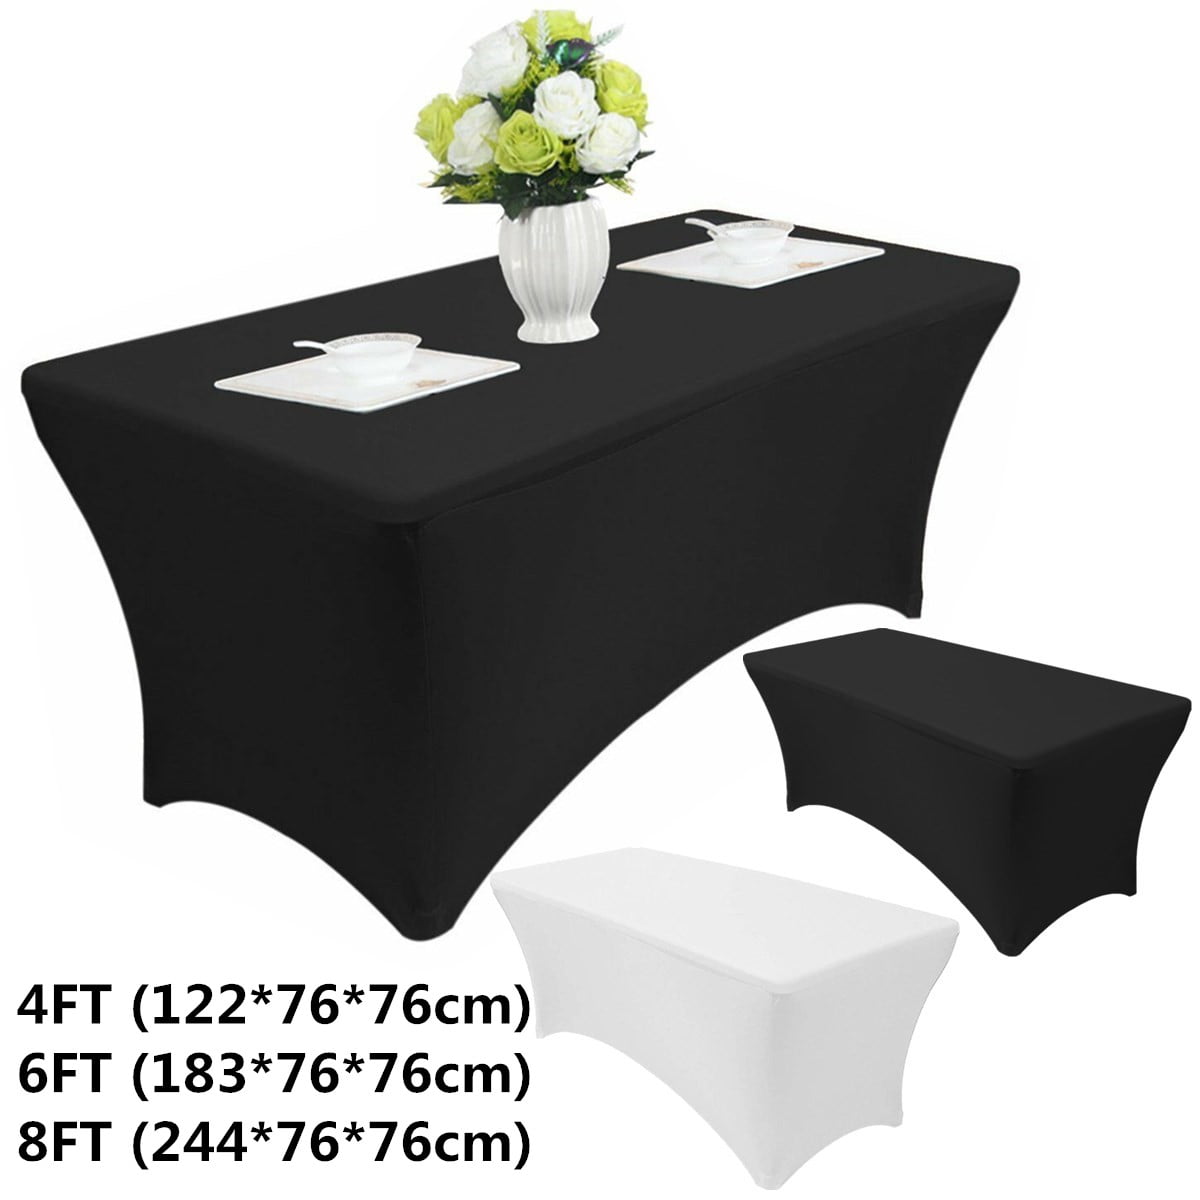 6FT Rectangular Spandex Stretch Tight Fit Table Cover Lycra Trestle Tablecloth